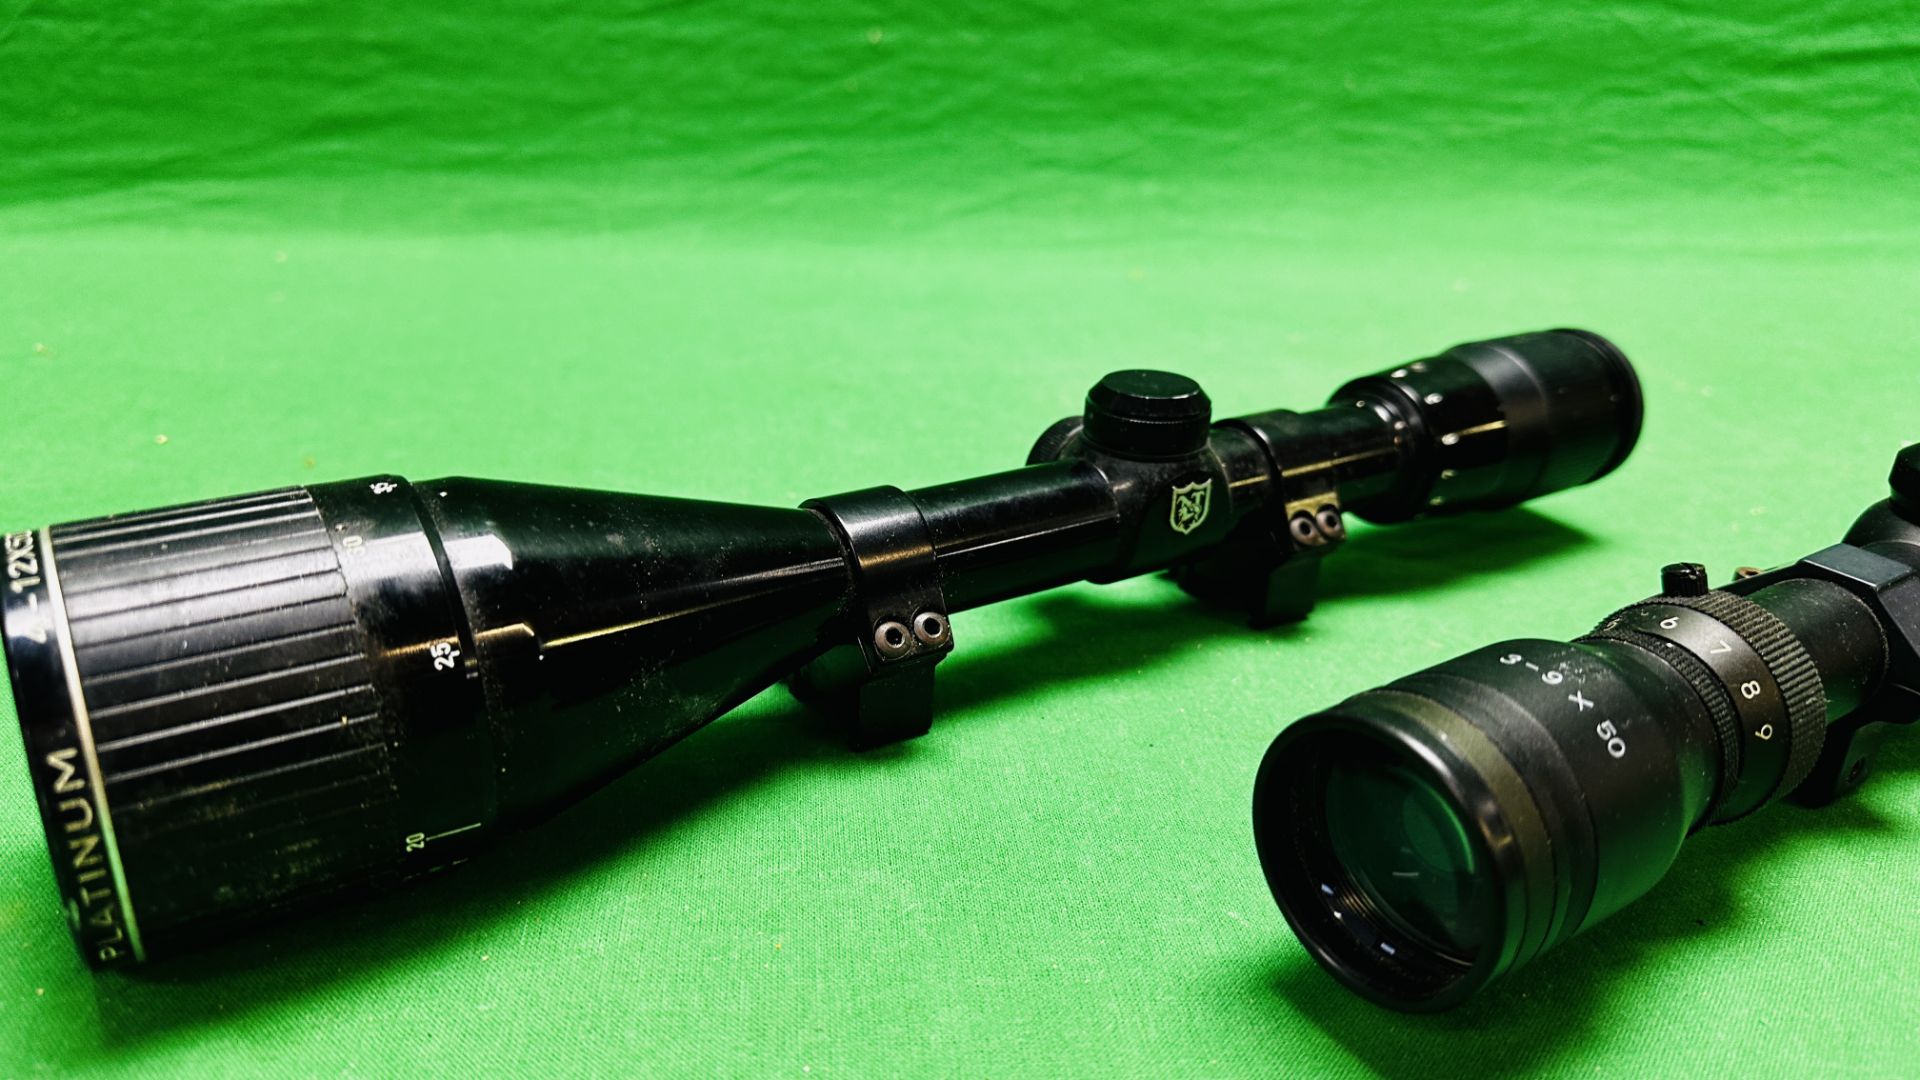 TWO RIFLE SCOPES TO INCLUDE NIKKO STIRLING PLATINUM 4-12X50 WA WITH MOUNTS AND ONE OTHER 3-9X50 - Image 4 of 8